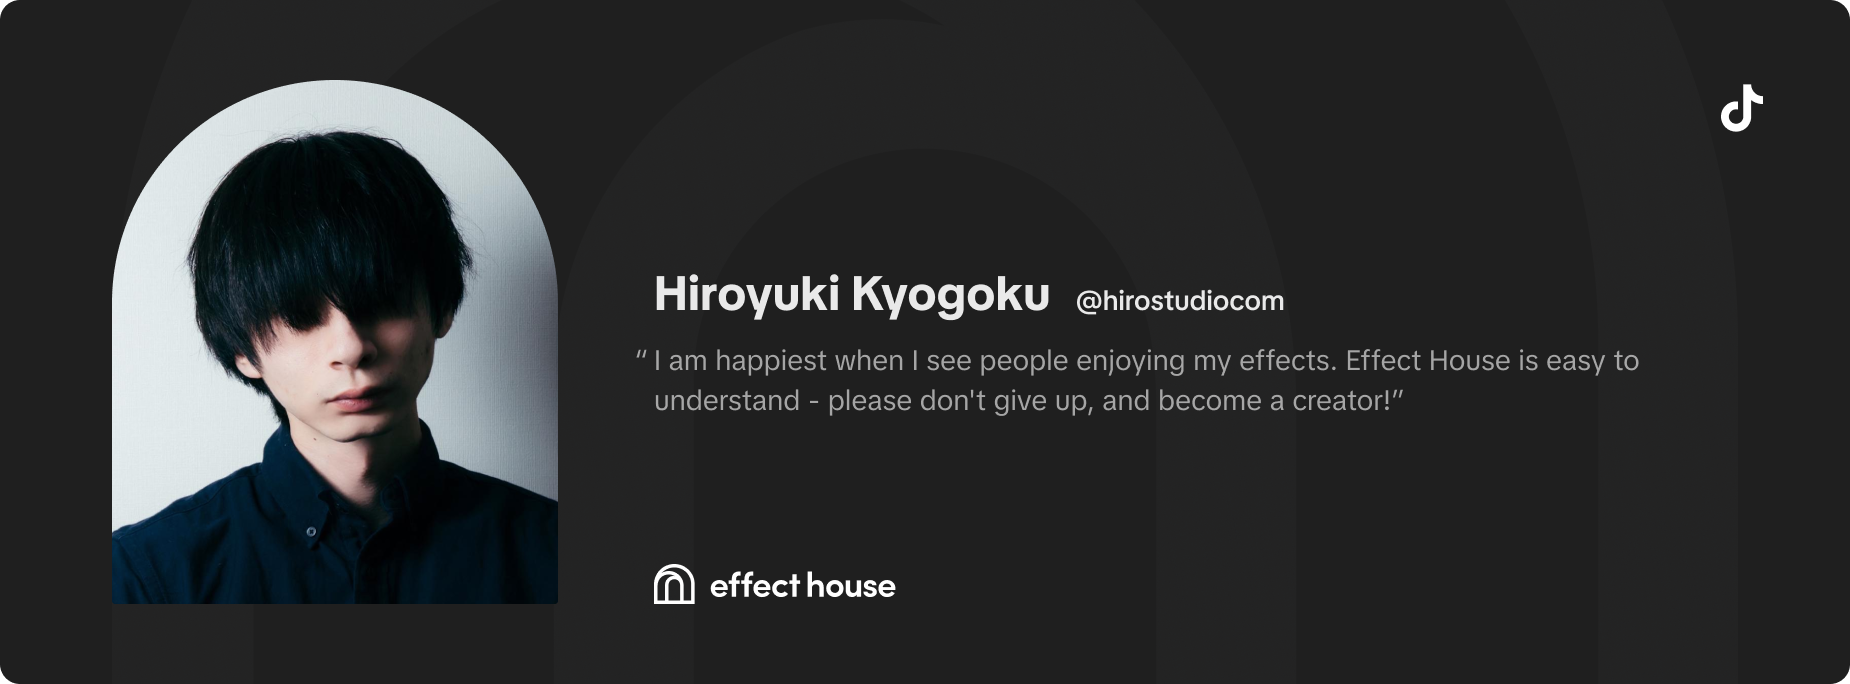 I am happiest when I see people enjoying my effects. Effect House is easy to understand - please don't give up, and become a creator! -Hiroyuki Kyogoku (@hirostudiocom)